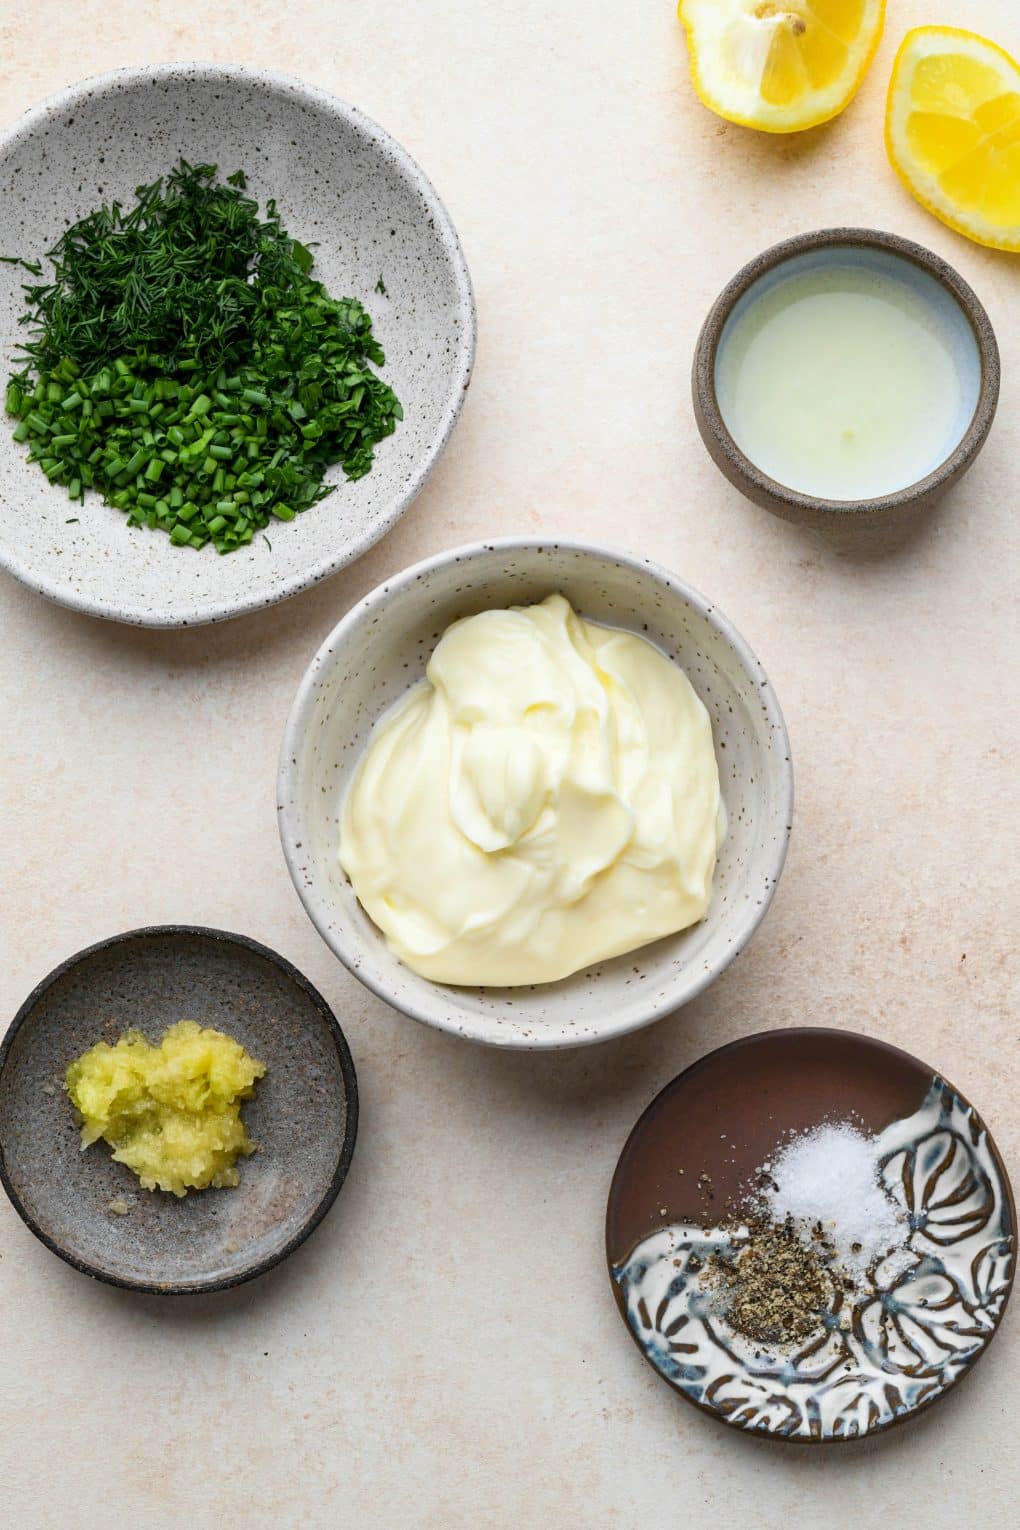 Ingredients for garlic herb aioli in a variety of ceramic dishes on a cream colored background.